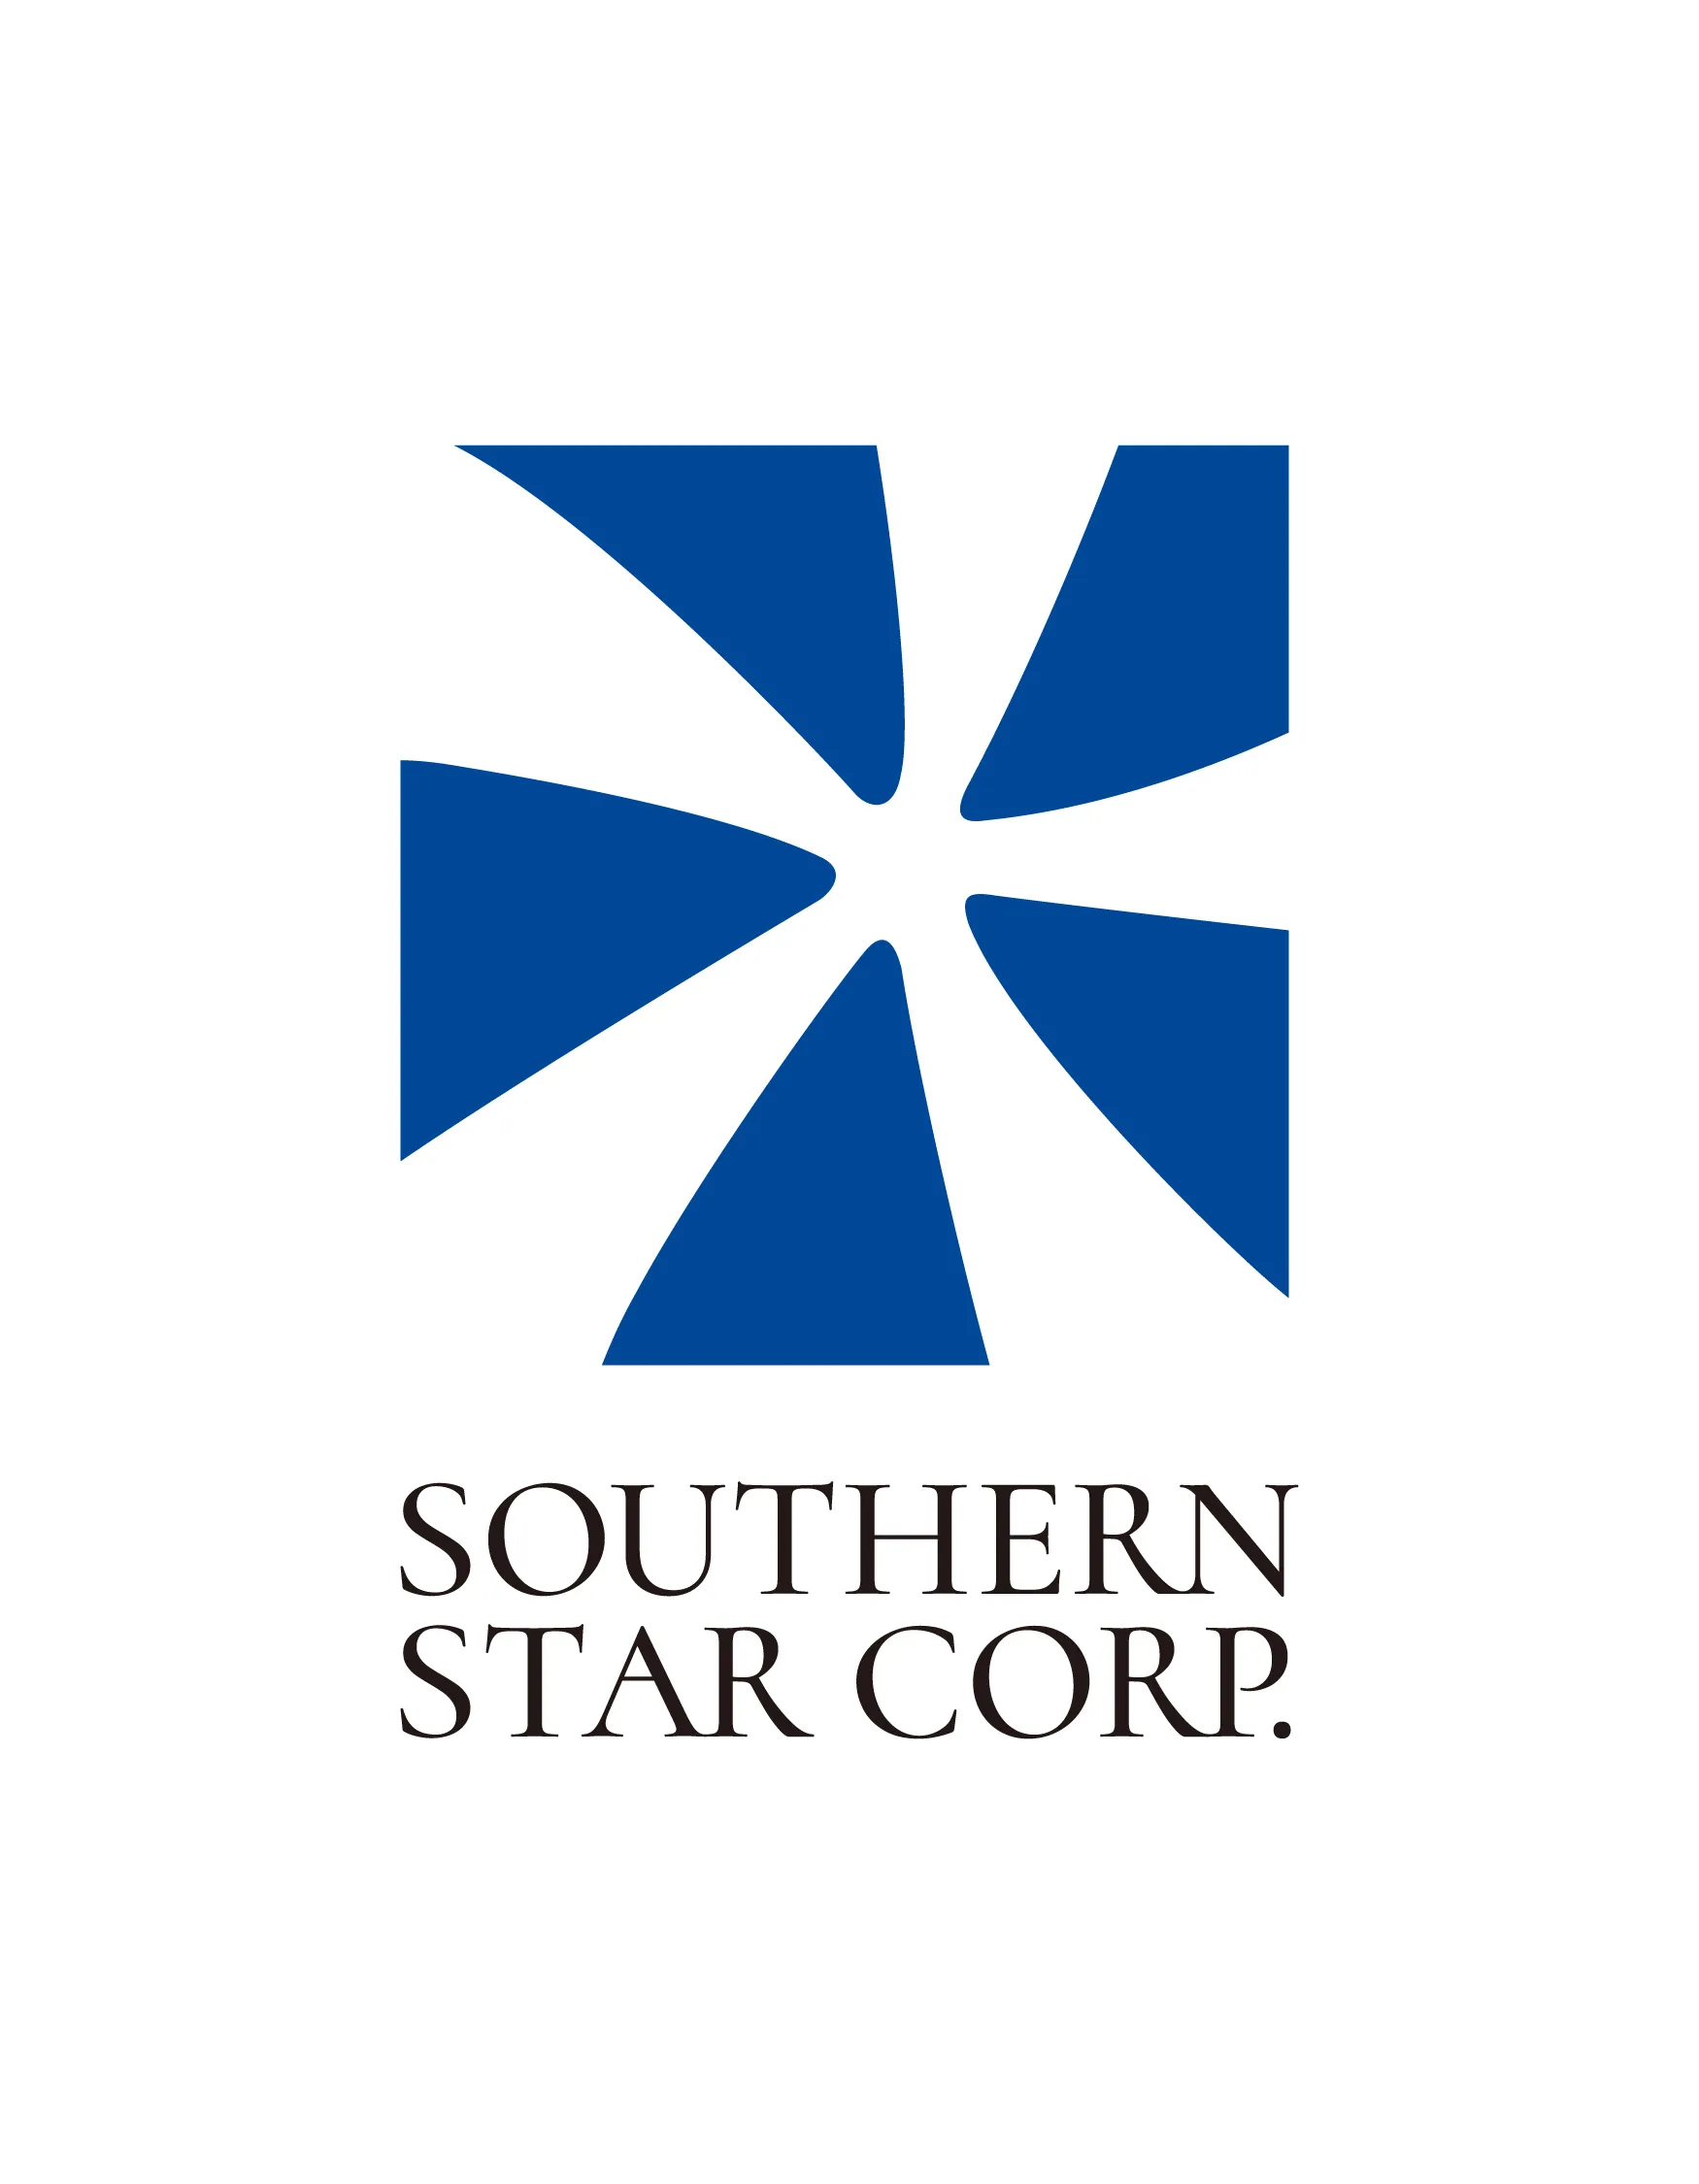 SOUTHERN STAR CORP.